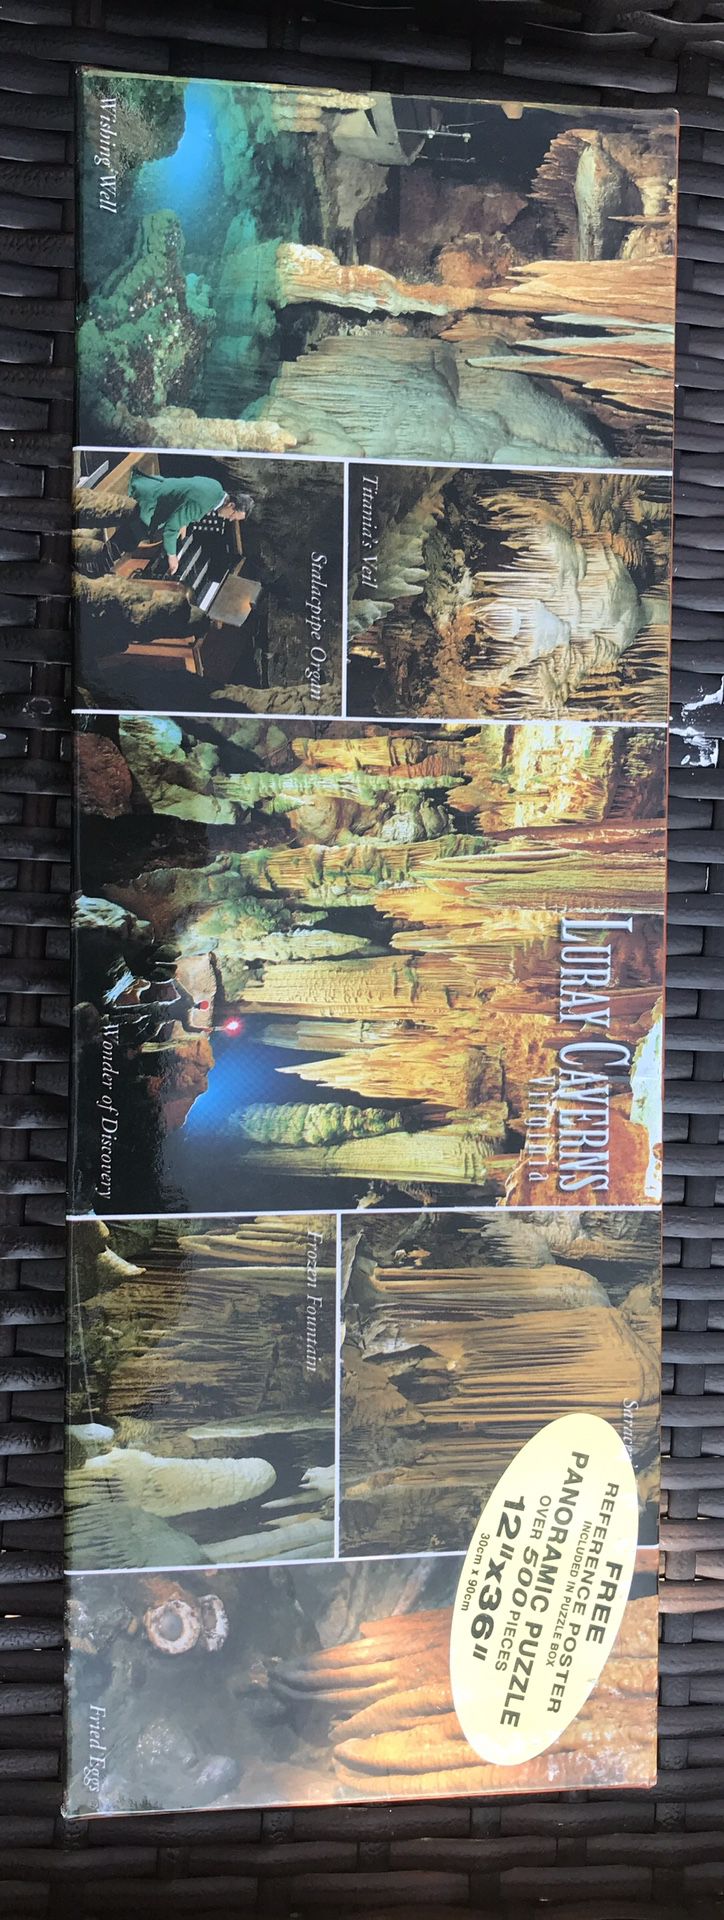 Panoramic Jigsaw Puzzle Virginia Luray Caverns - Giant's Hall and More!